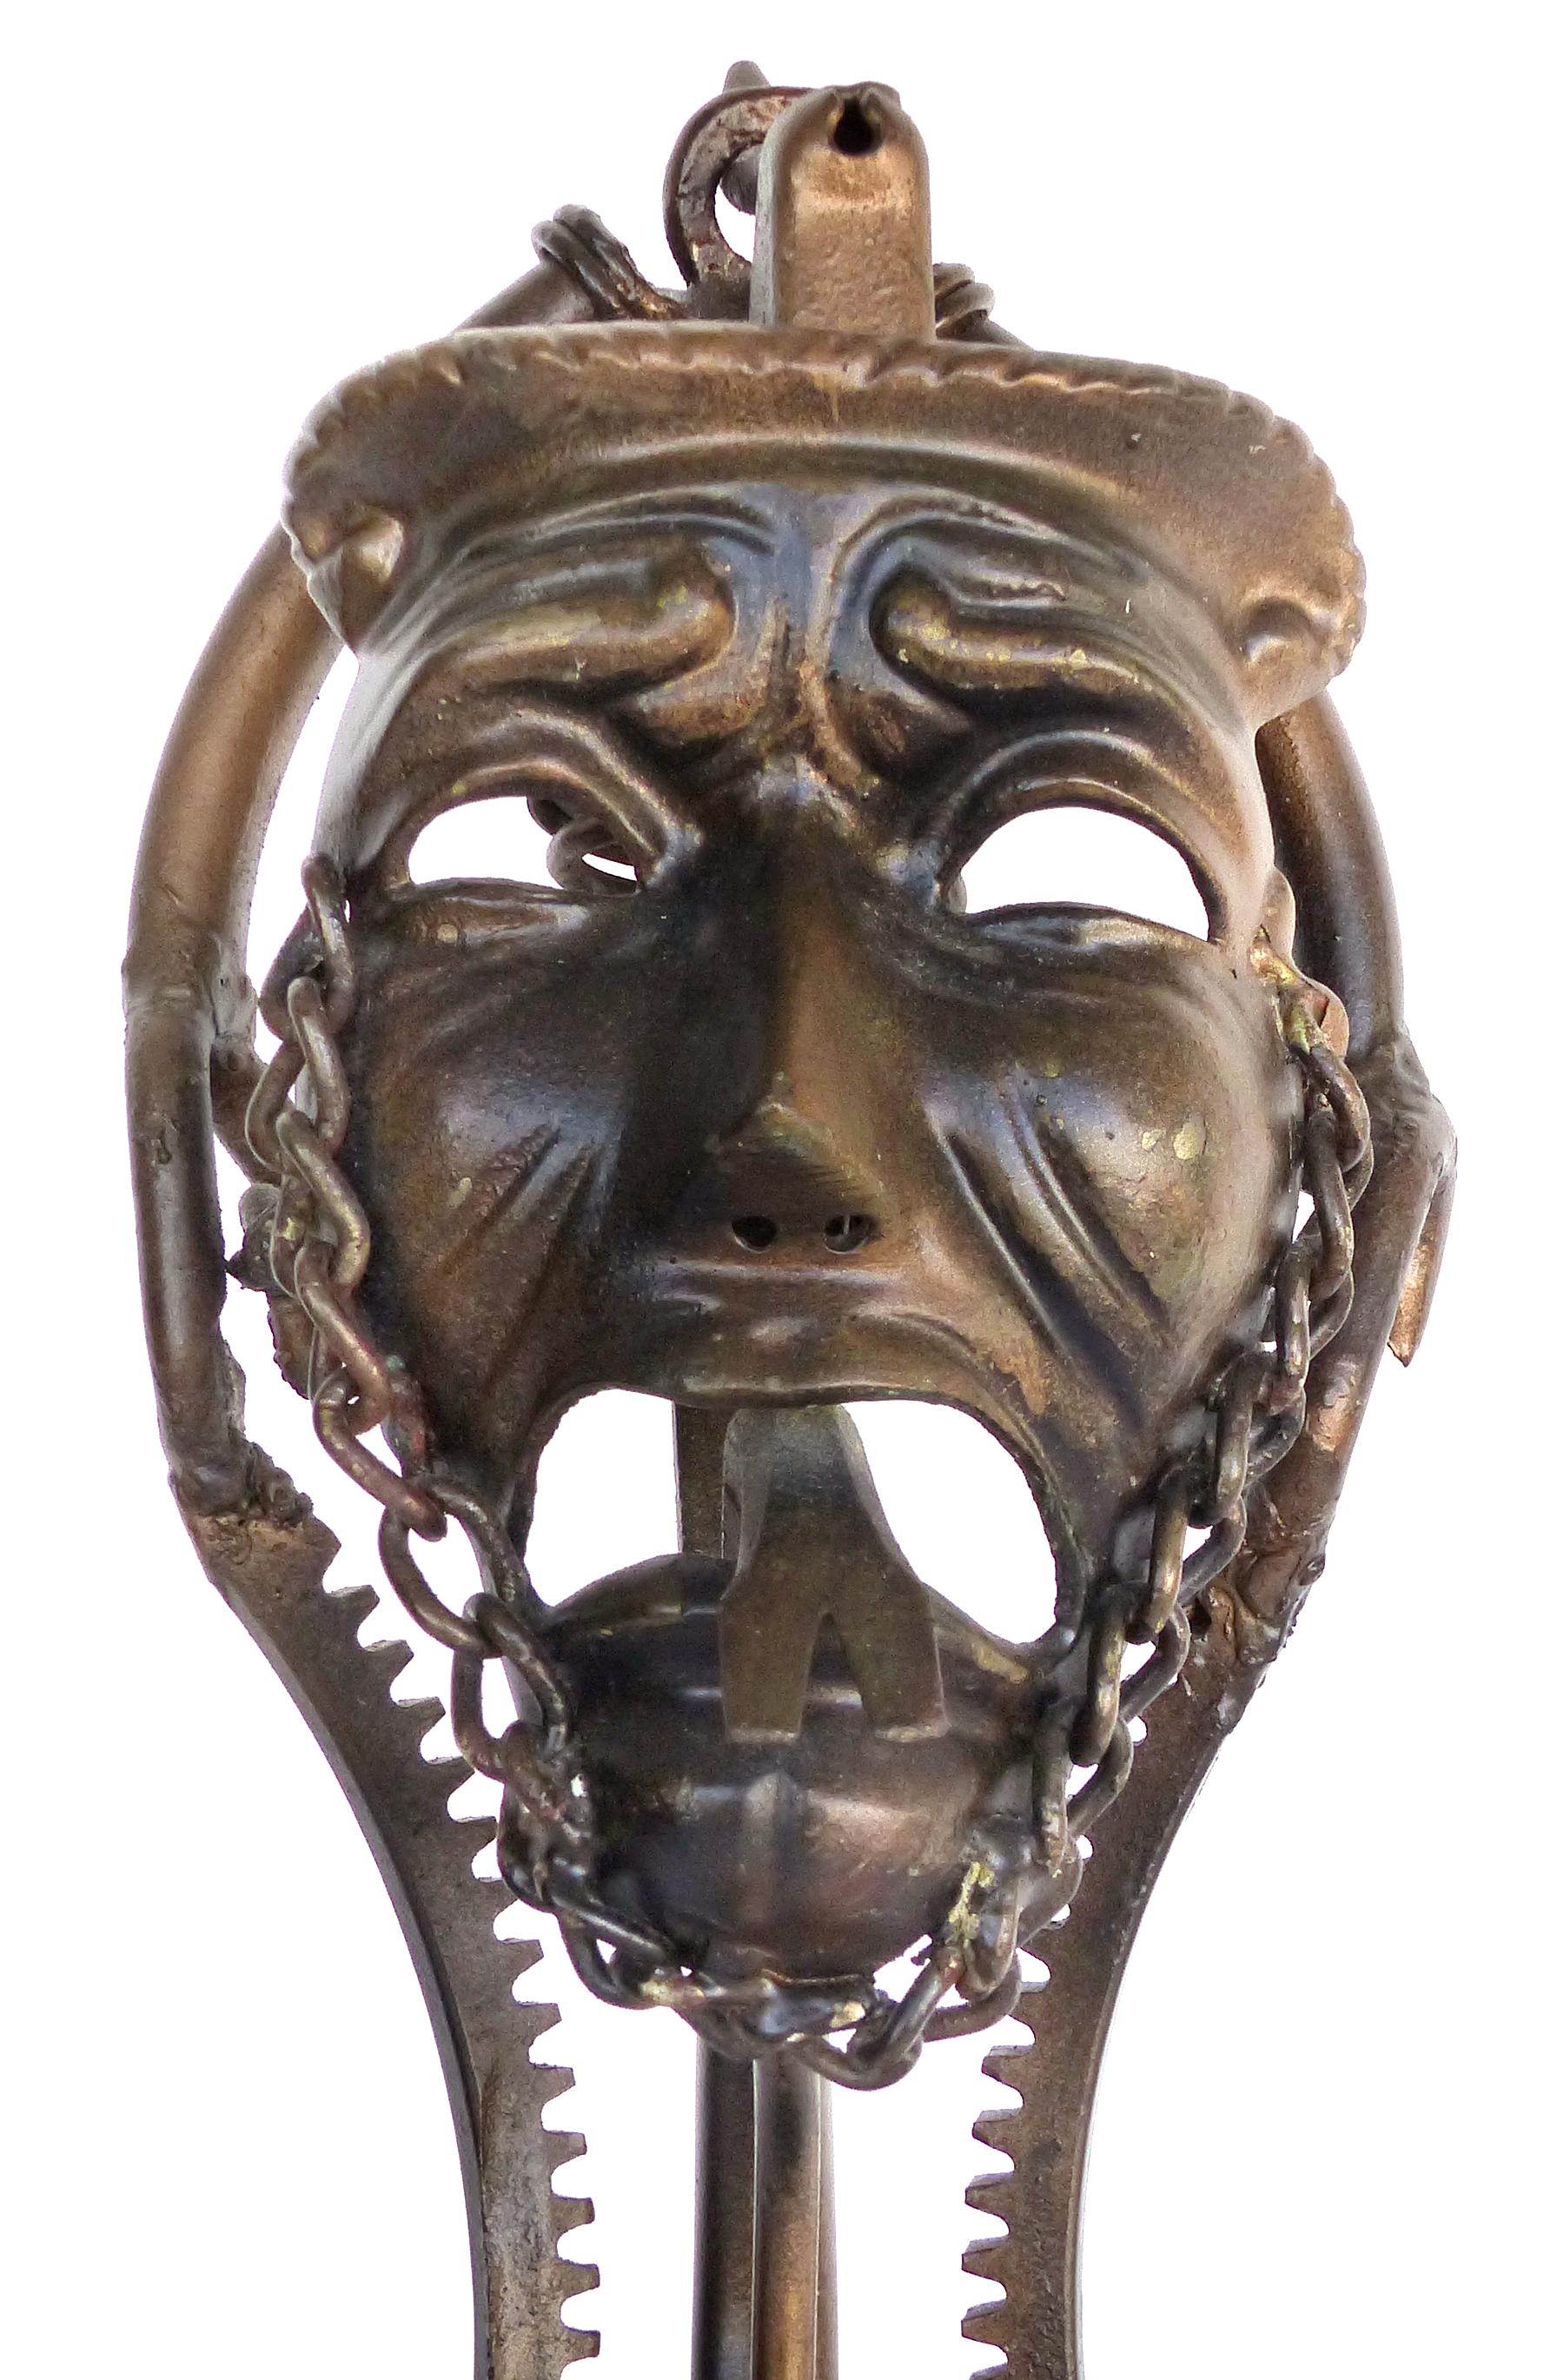 20th Century Found Objects Sculptures of Comedy and Tragedy Theater Masks by Dewey Smith